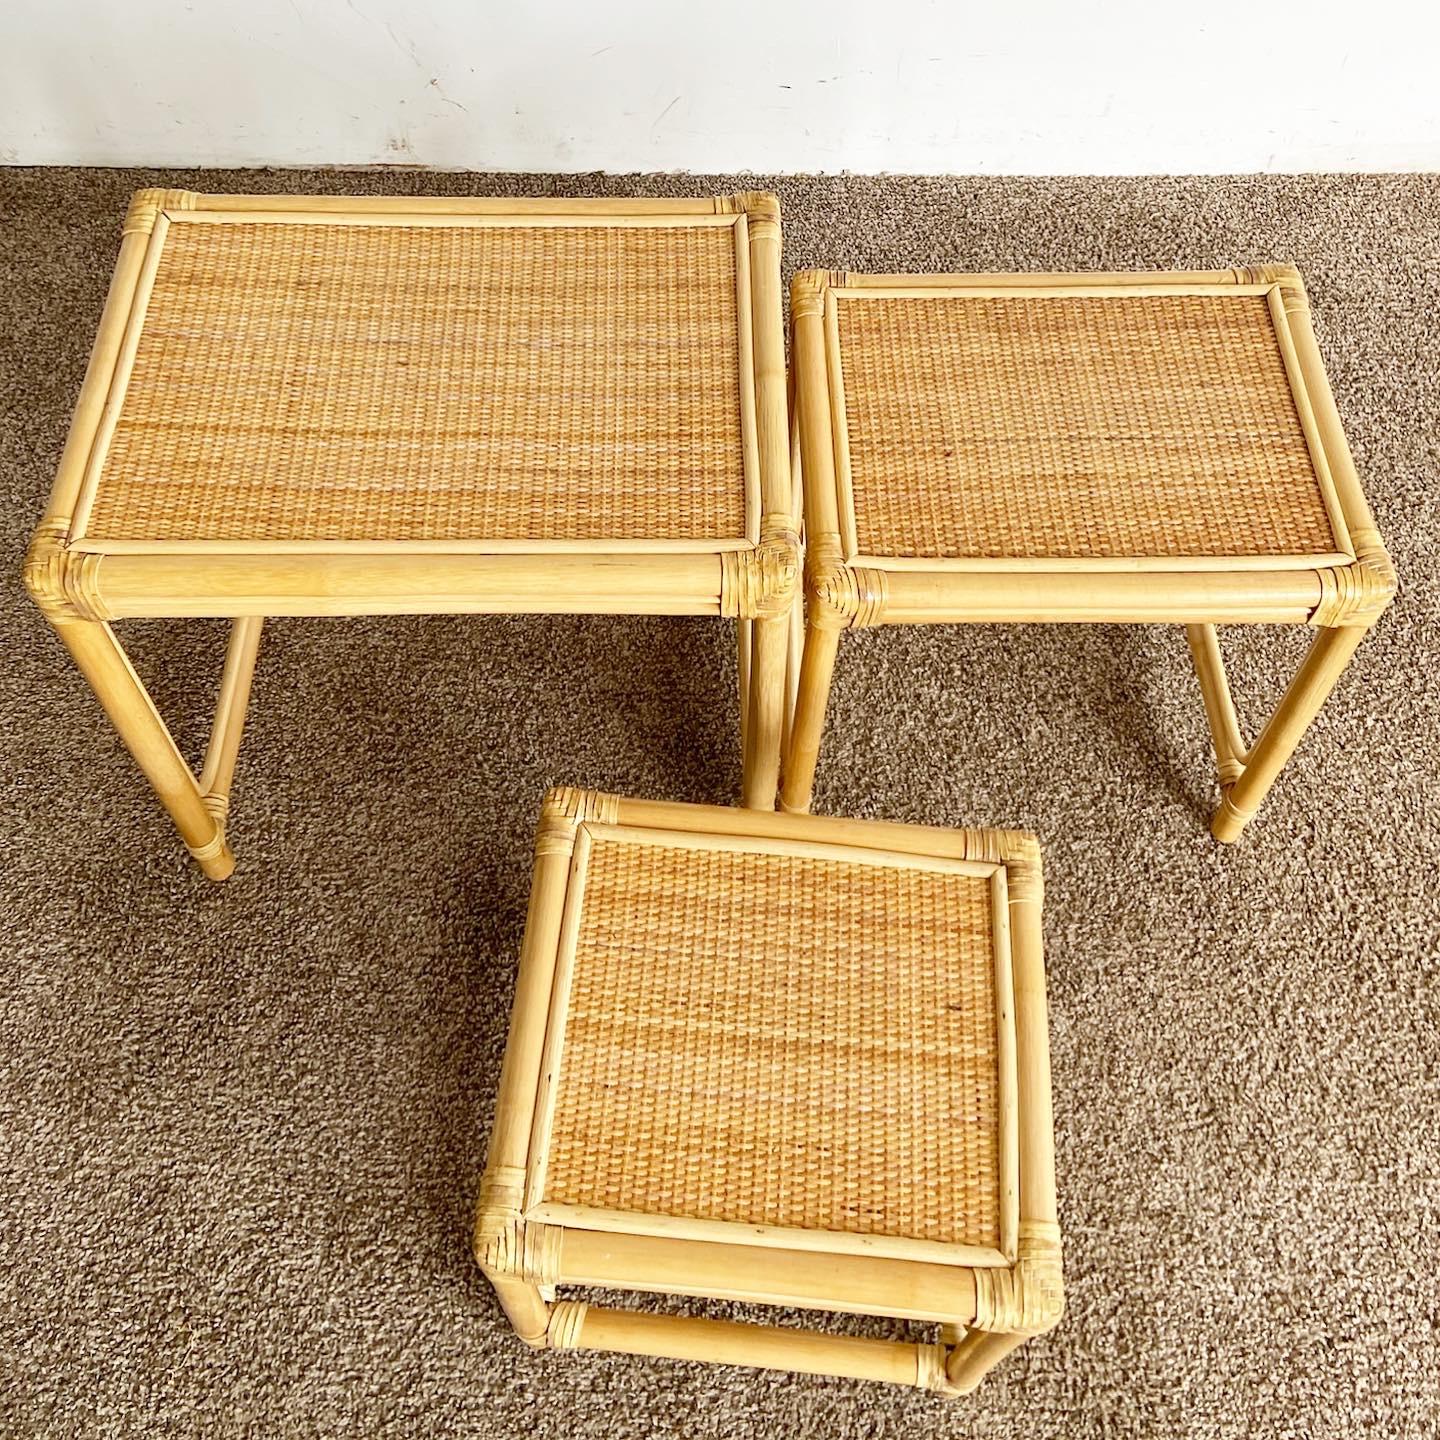 Boho Chic Bamboo Rattan and Wicker Nesting Tables, Set of 3 For Sale 3